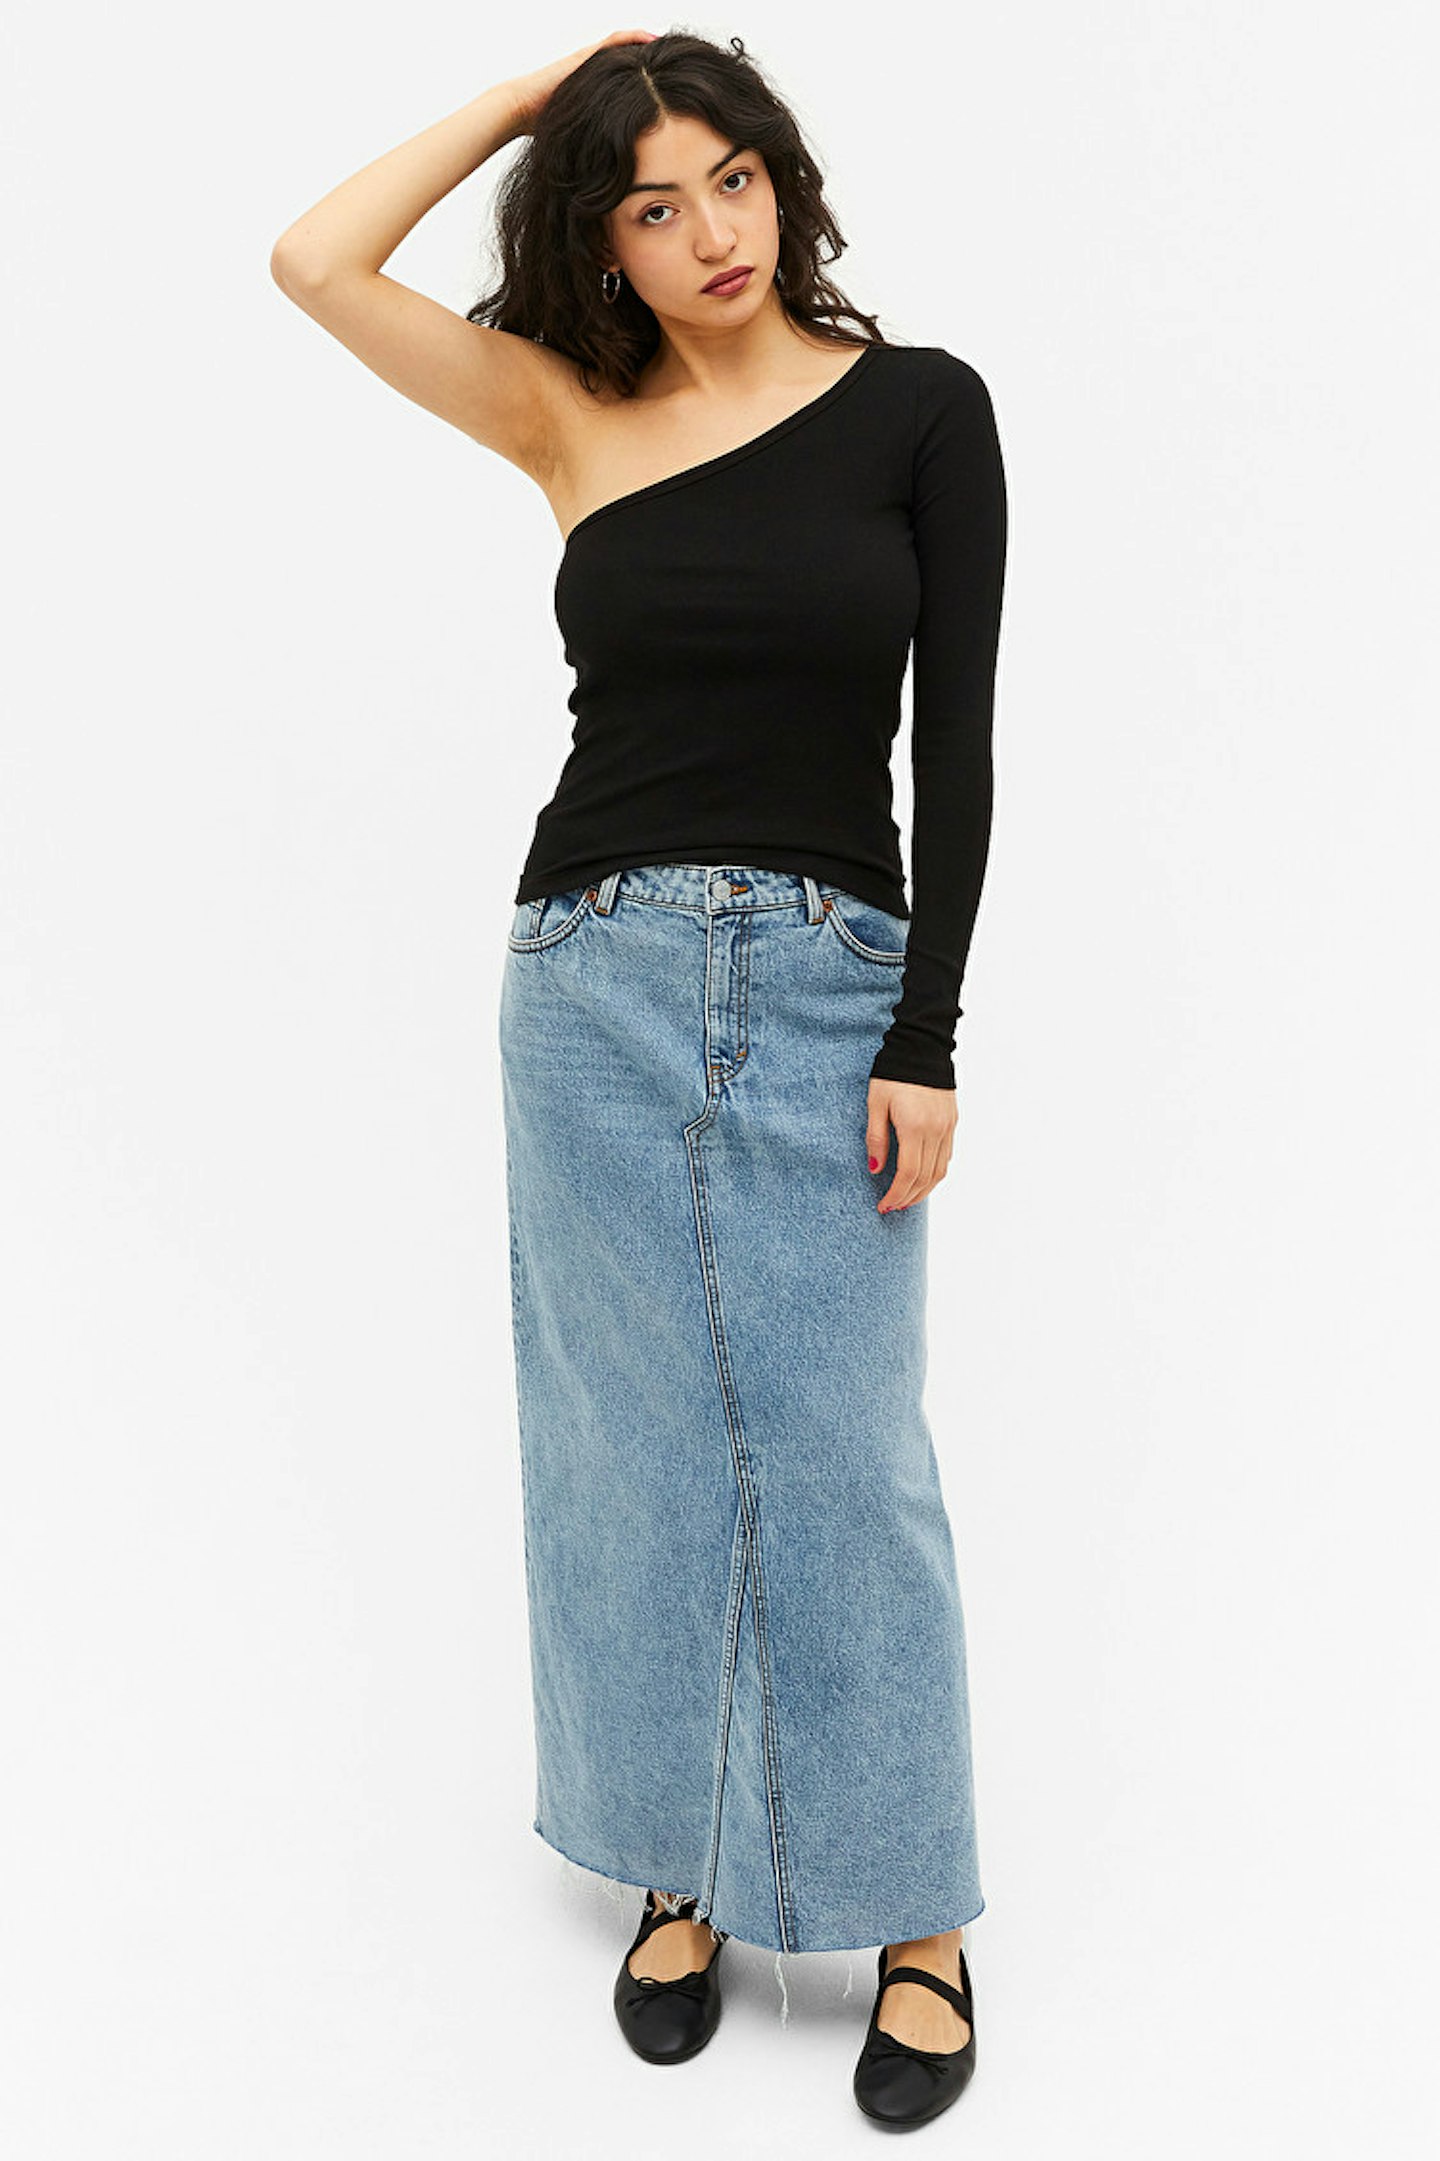 The Denim Maxi Skirt Is Back Once Again